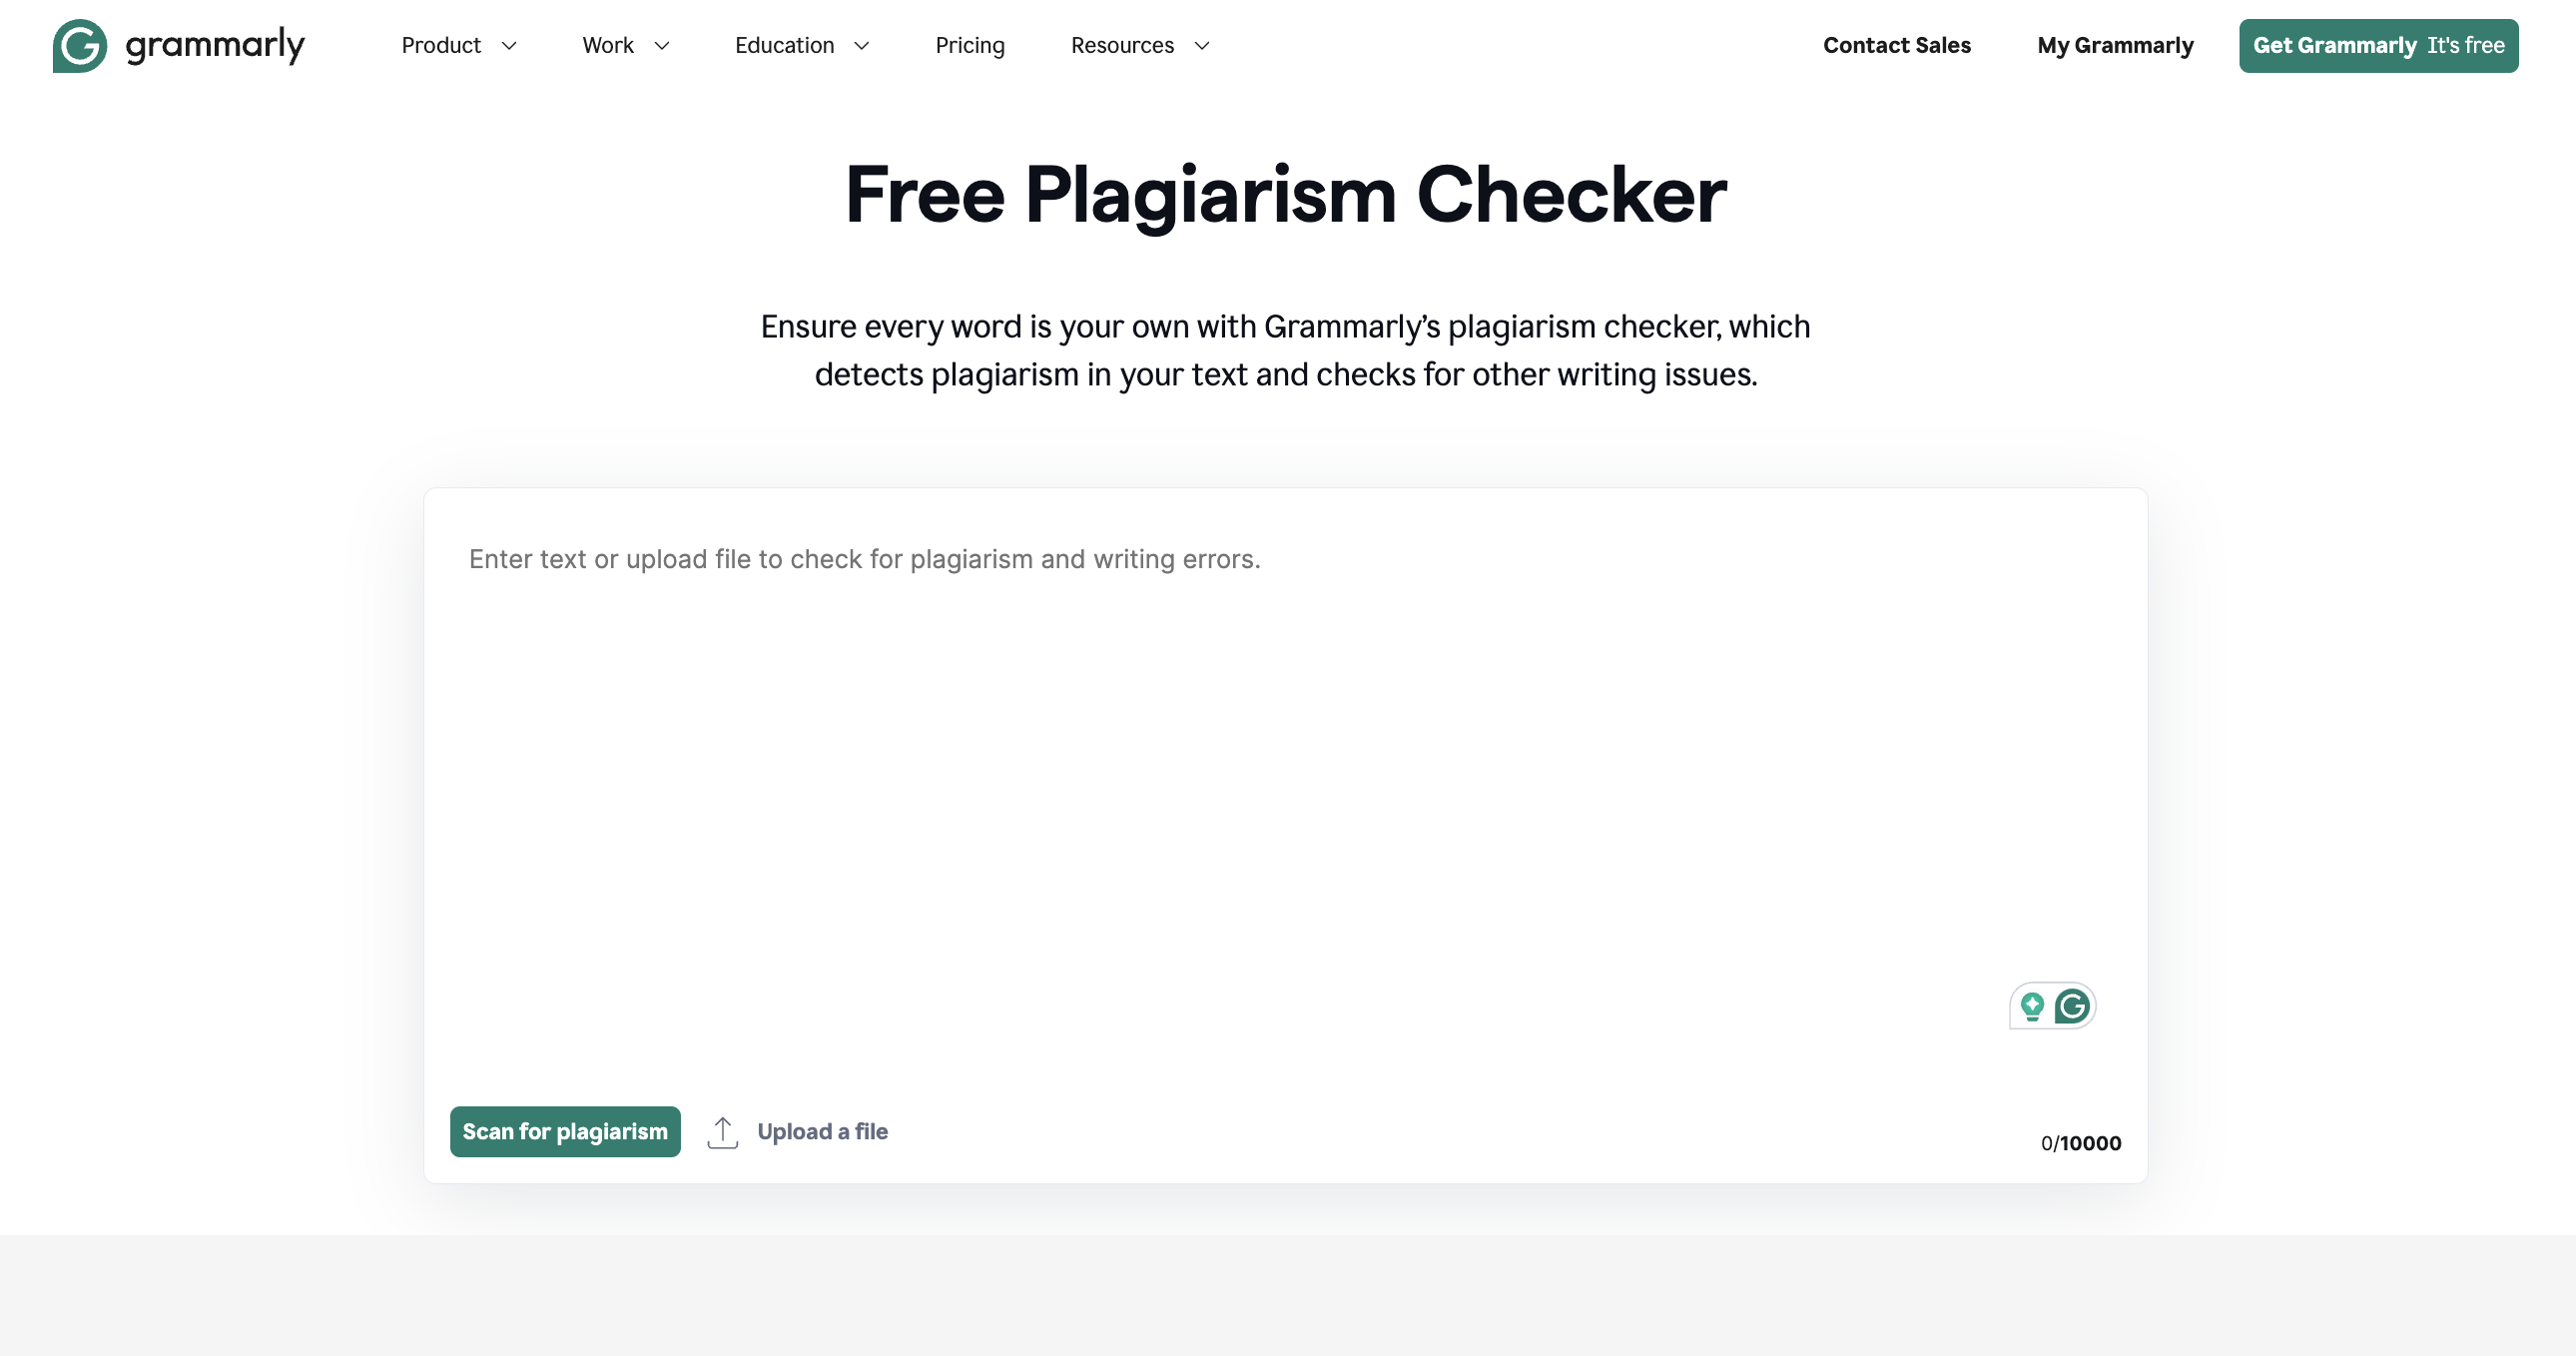 Screenshot of Grammarly's Free Plagiarism Checker page, showing a text box for uploading or pasting text to scan for plagiarism and writing issues. 